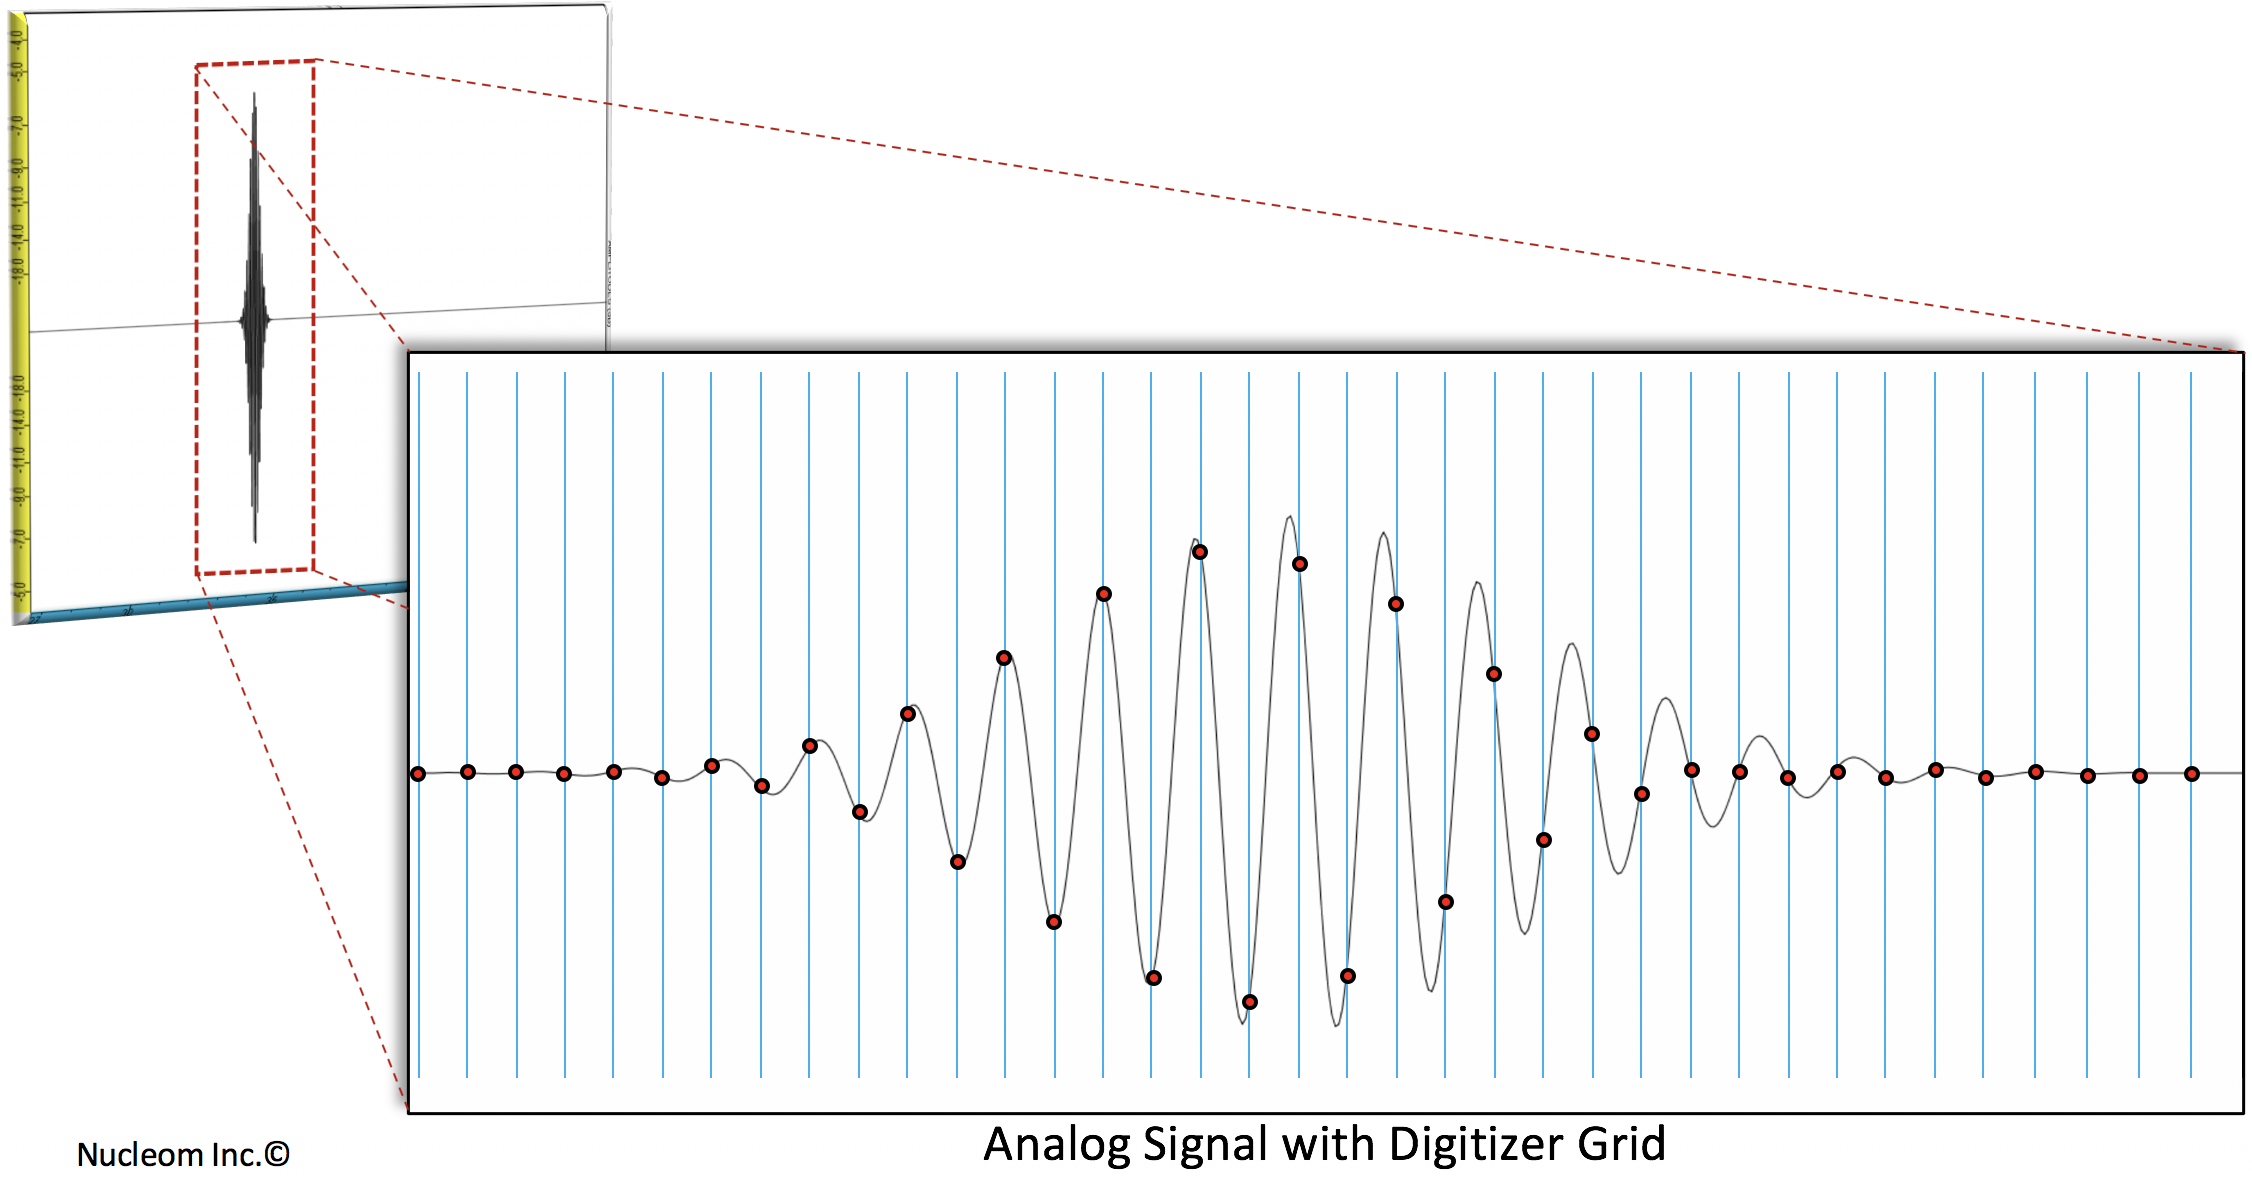 Analogue Signal with Digitizer Grid